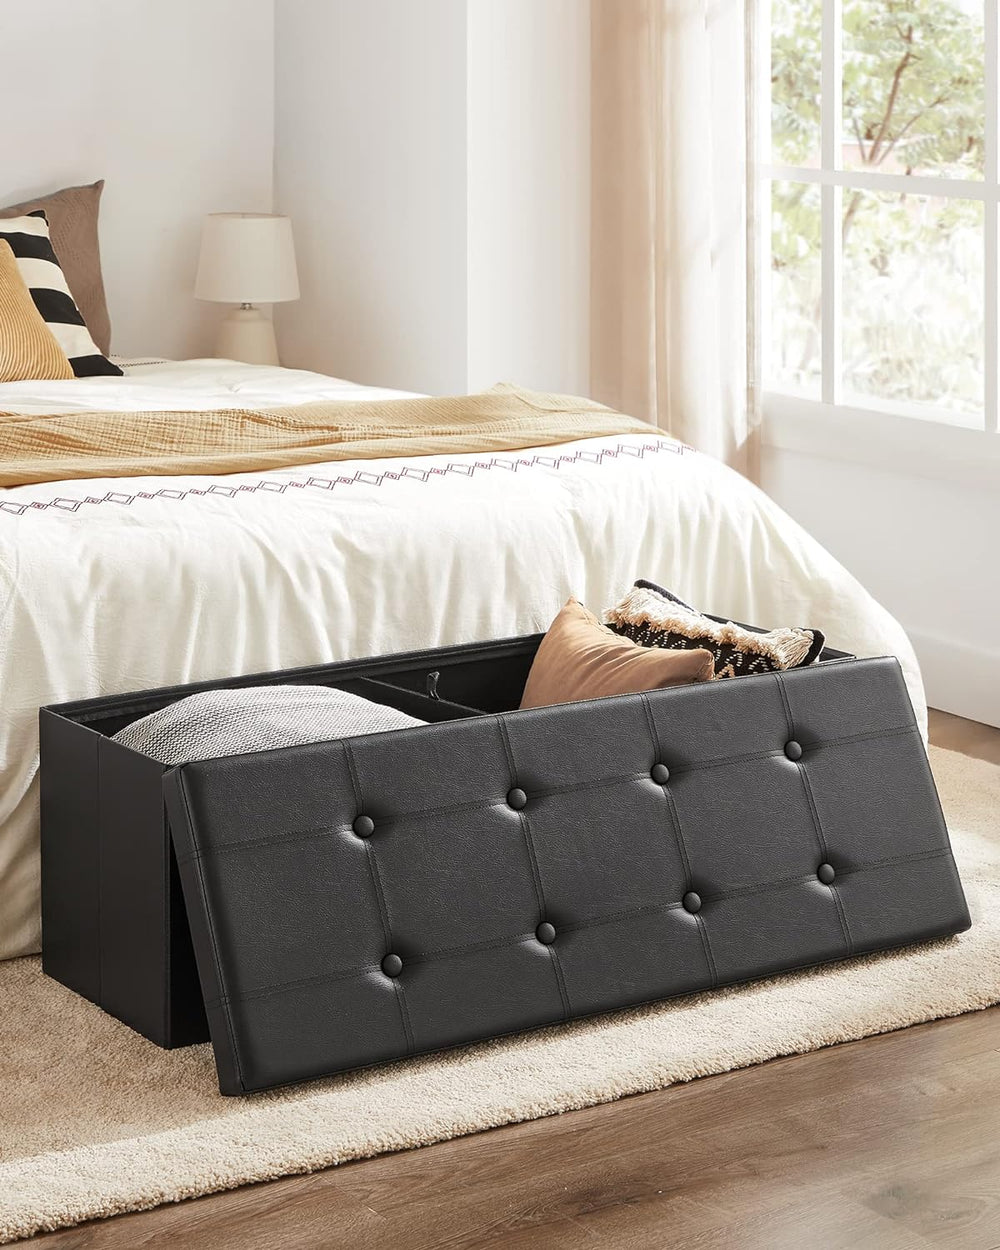 SONGMICS Padded Seat Folding Storage Ottoman Bench with Storage Space Black